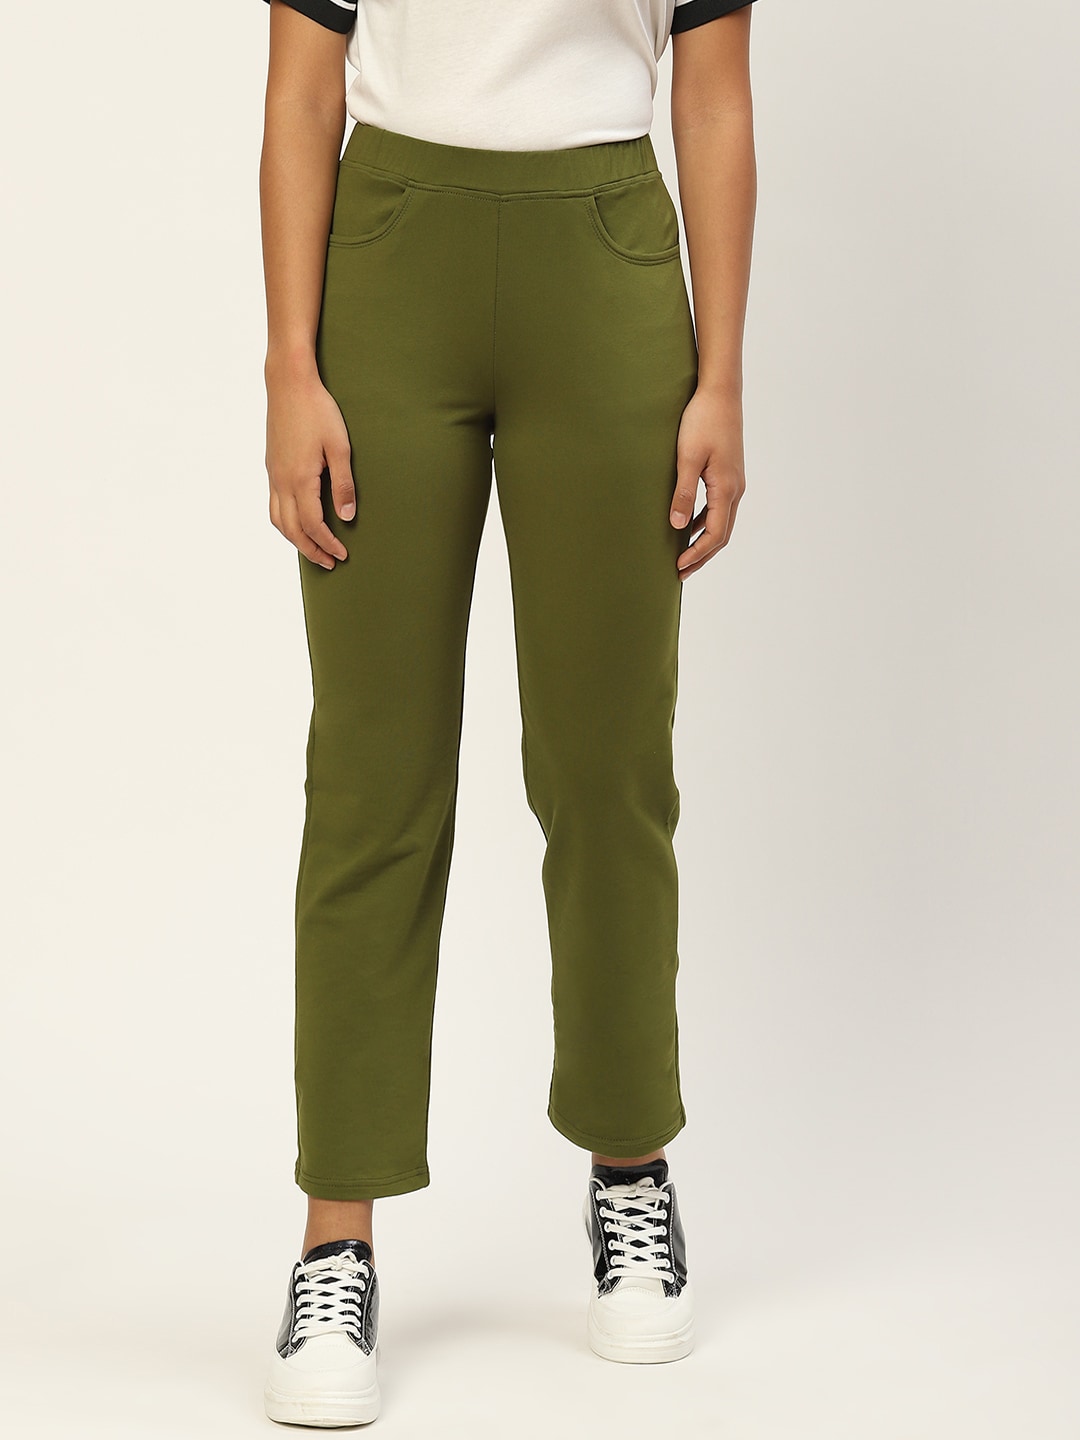 BRINNS Women Olive Green Smart Trousers Price in India